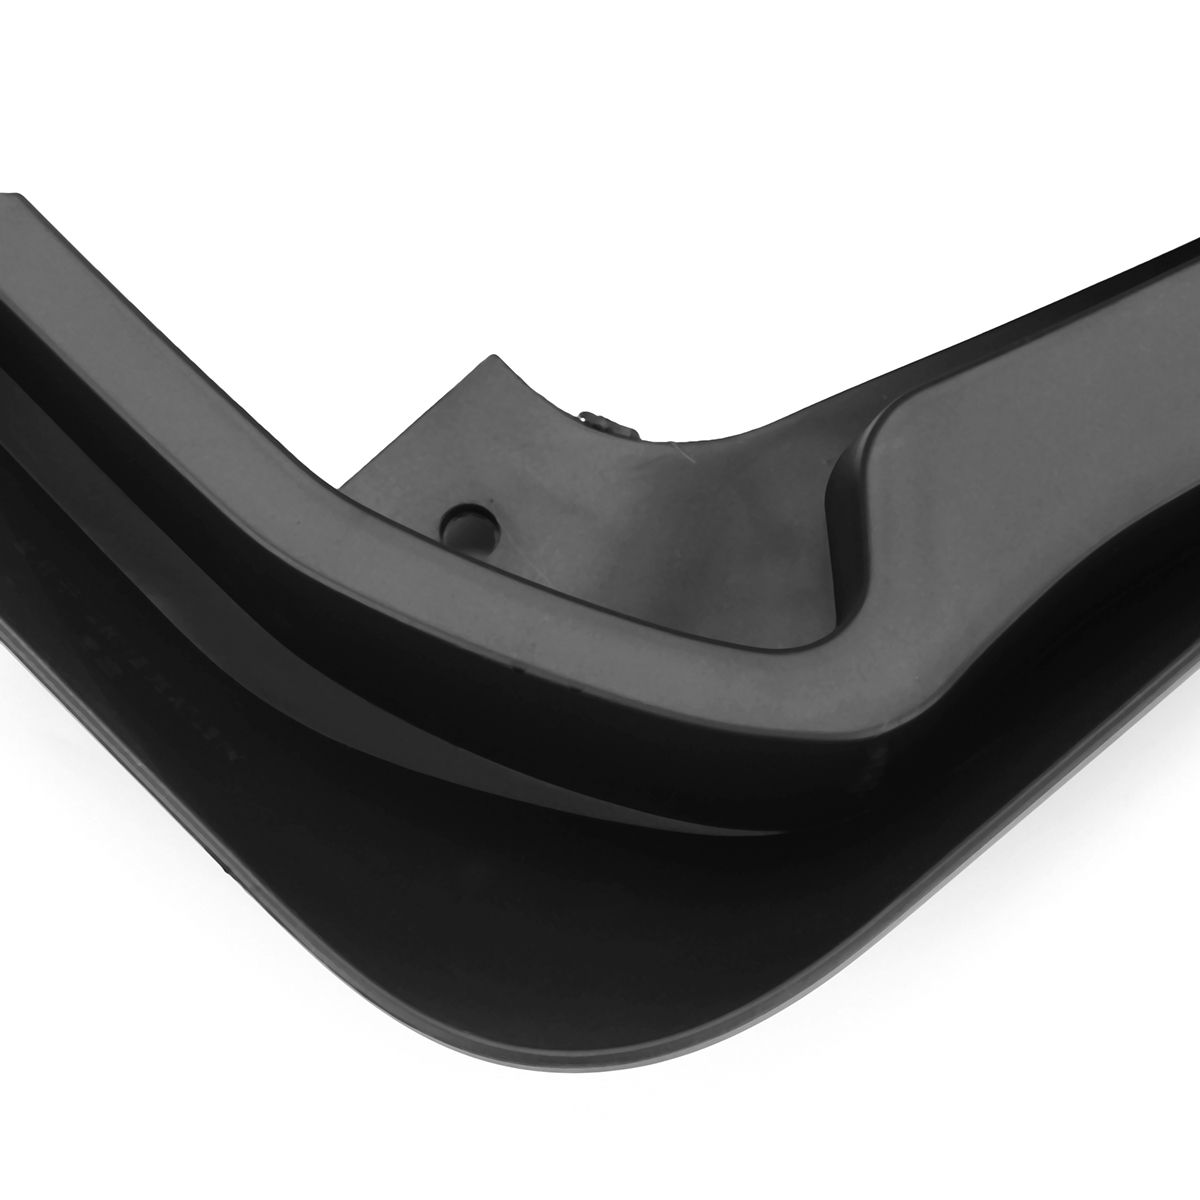 Auto-Front-Rear-Car-Mudguards-For-Ford-Focus-3-MK3-Hatchback-2011-2016-1394418